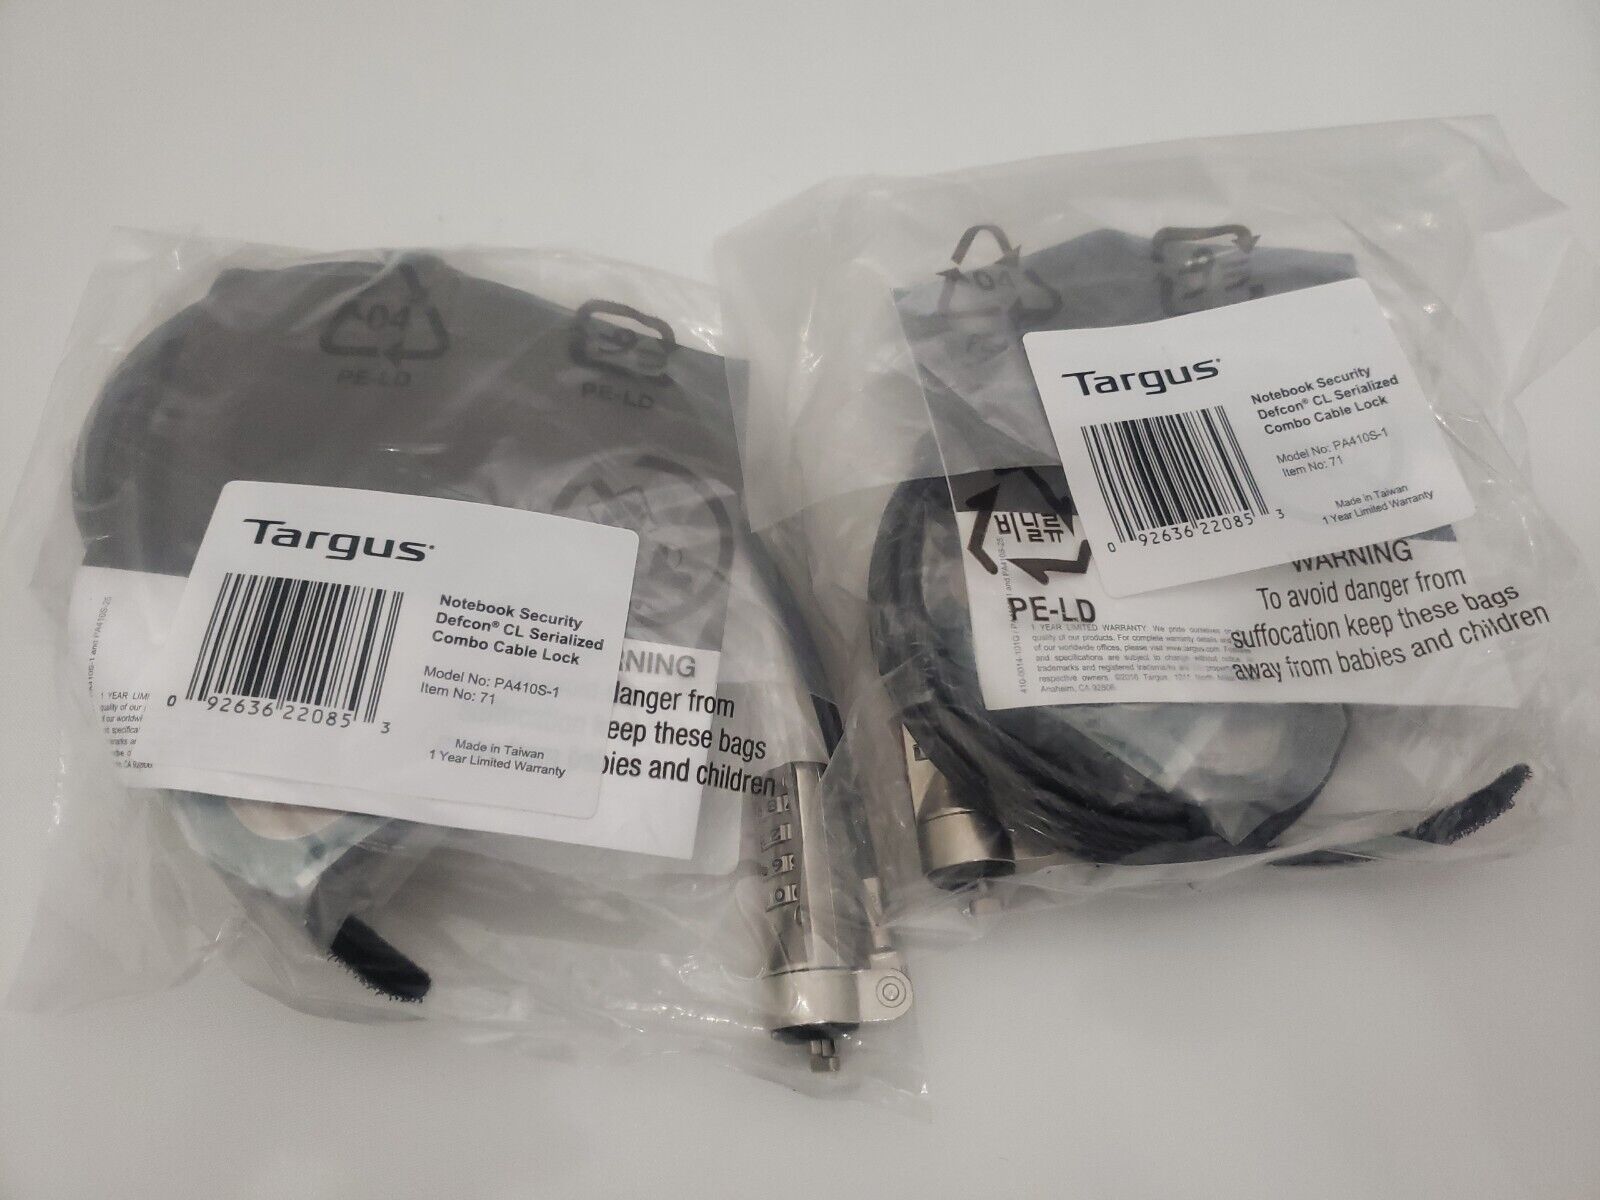 NEW Targus DEFCON T-Lock Serialized Combo Cable Lock PA410S-1 (AMX) Lot of 2